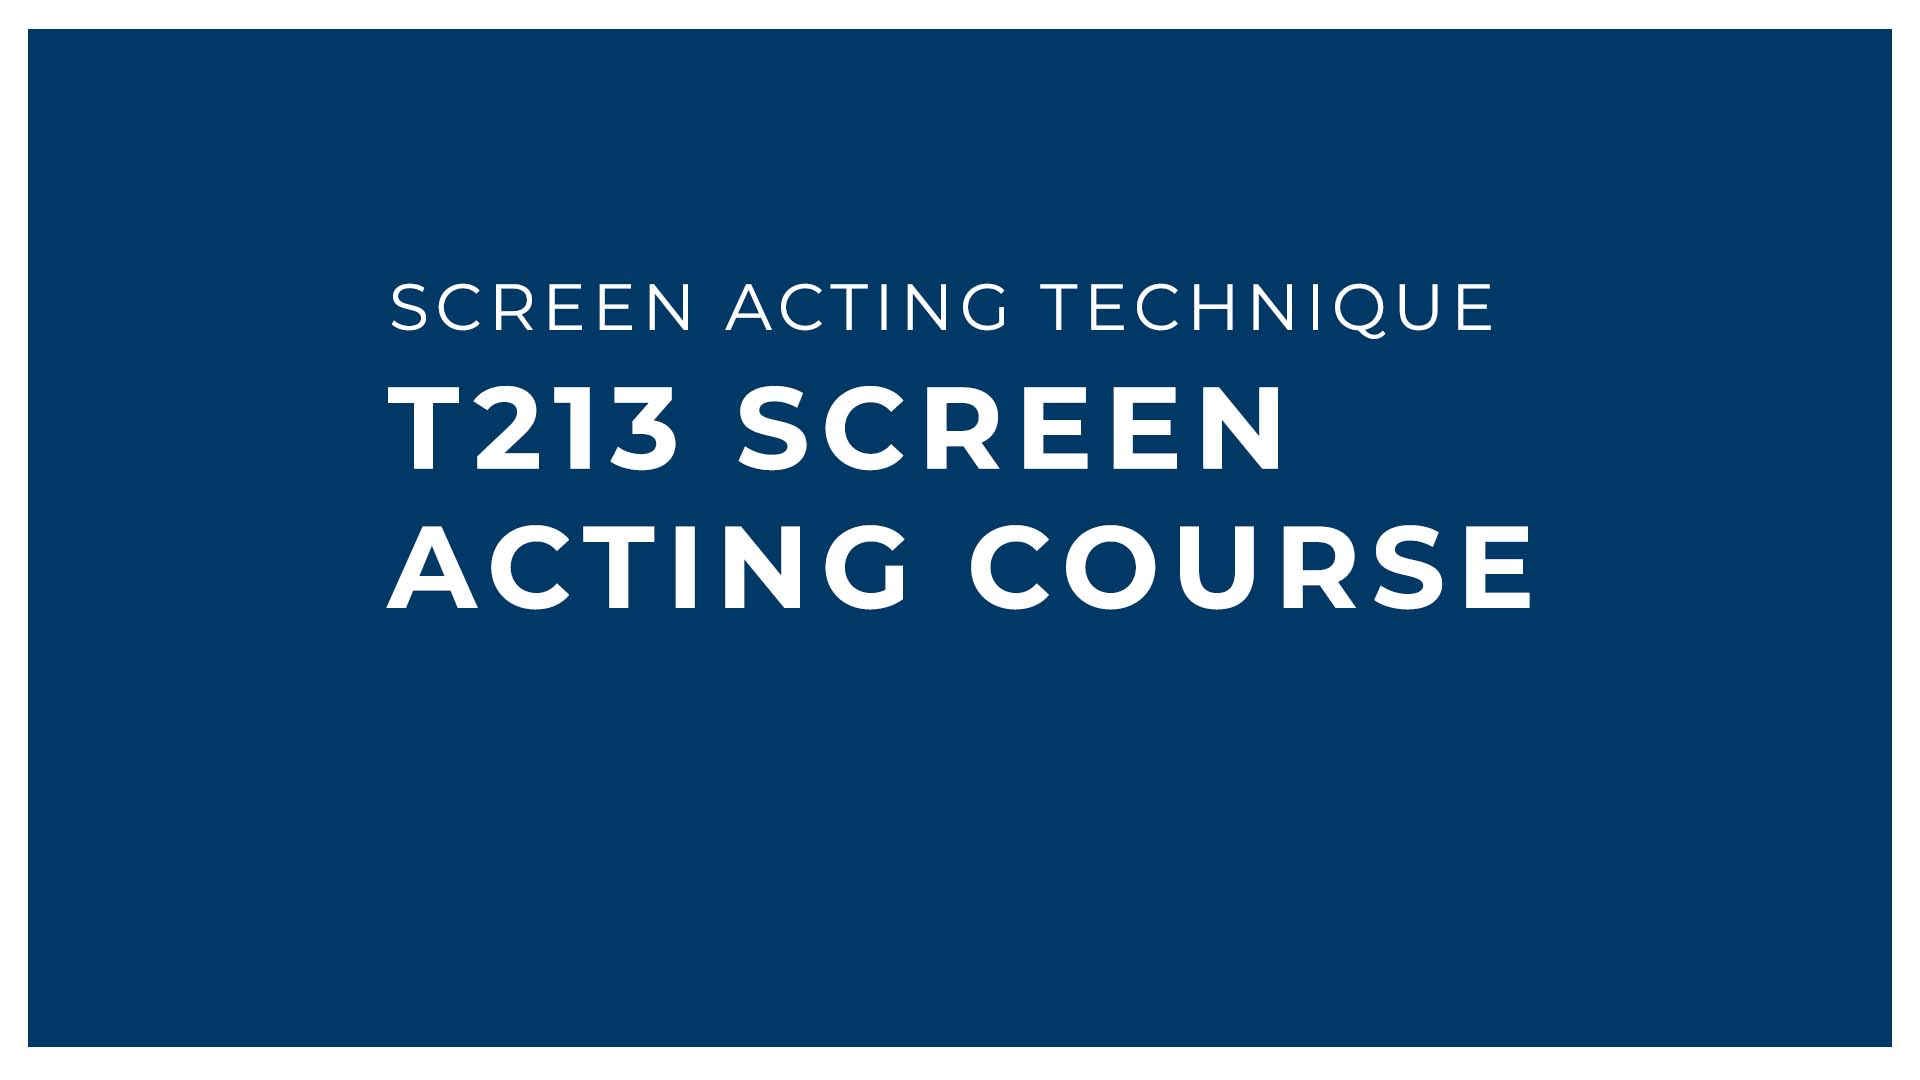 Online Screen Acting Course - Fay Beck Studio